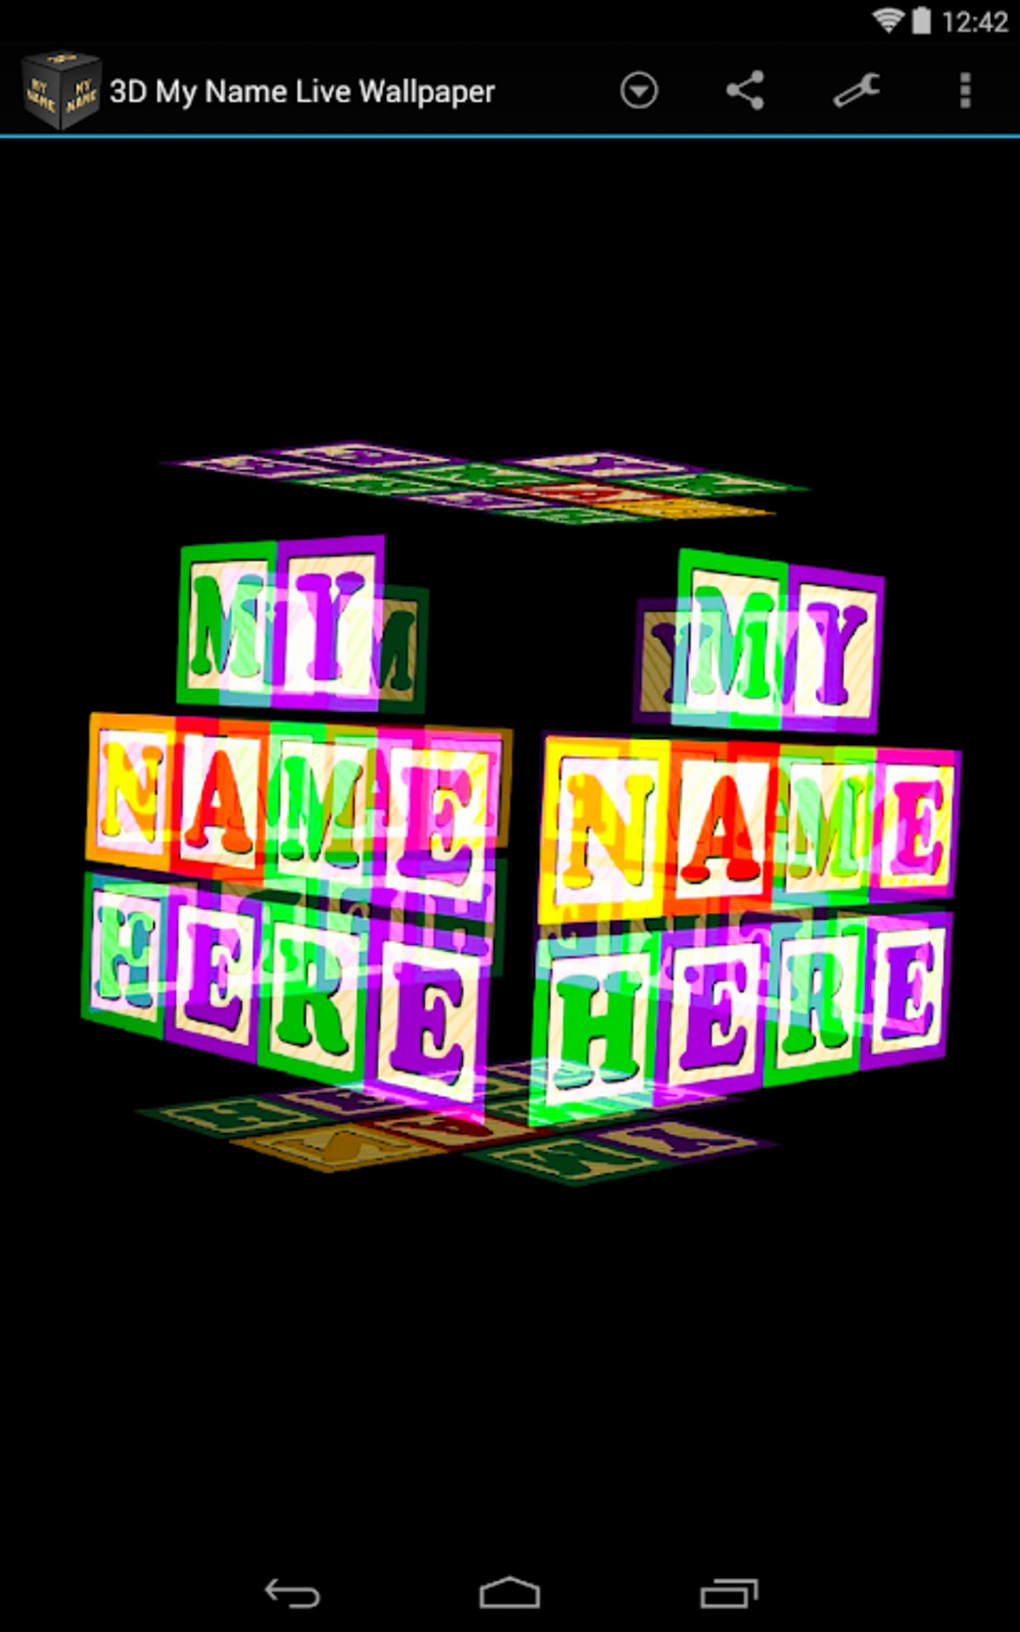 3D My Name Live Wallpaper APK for Android - Download